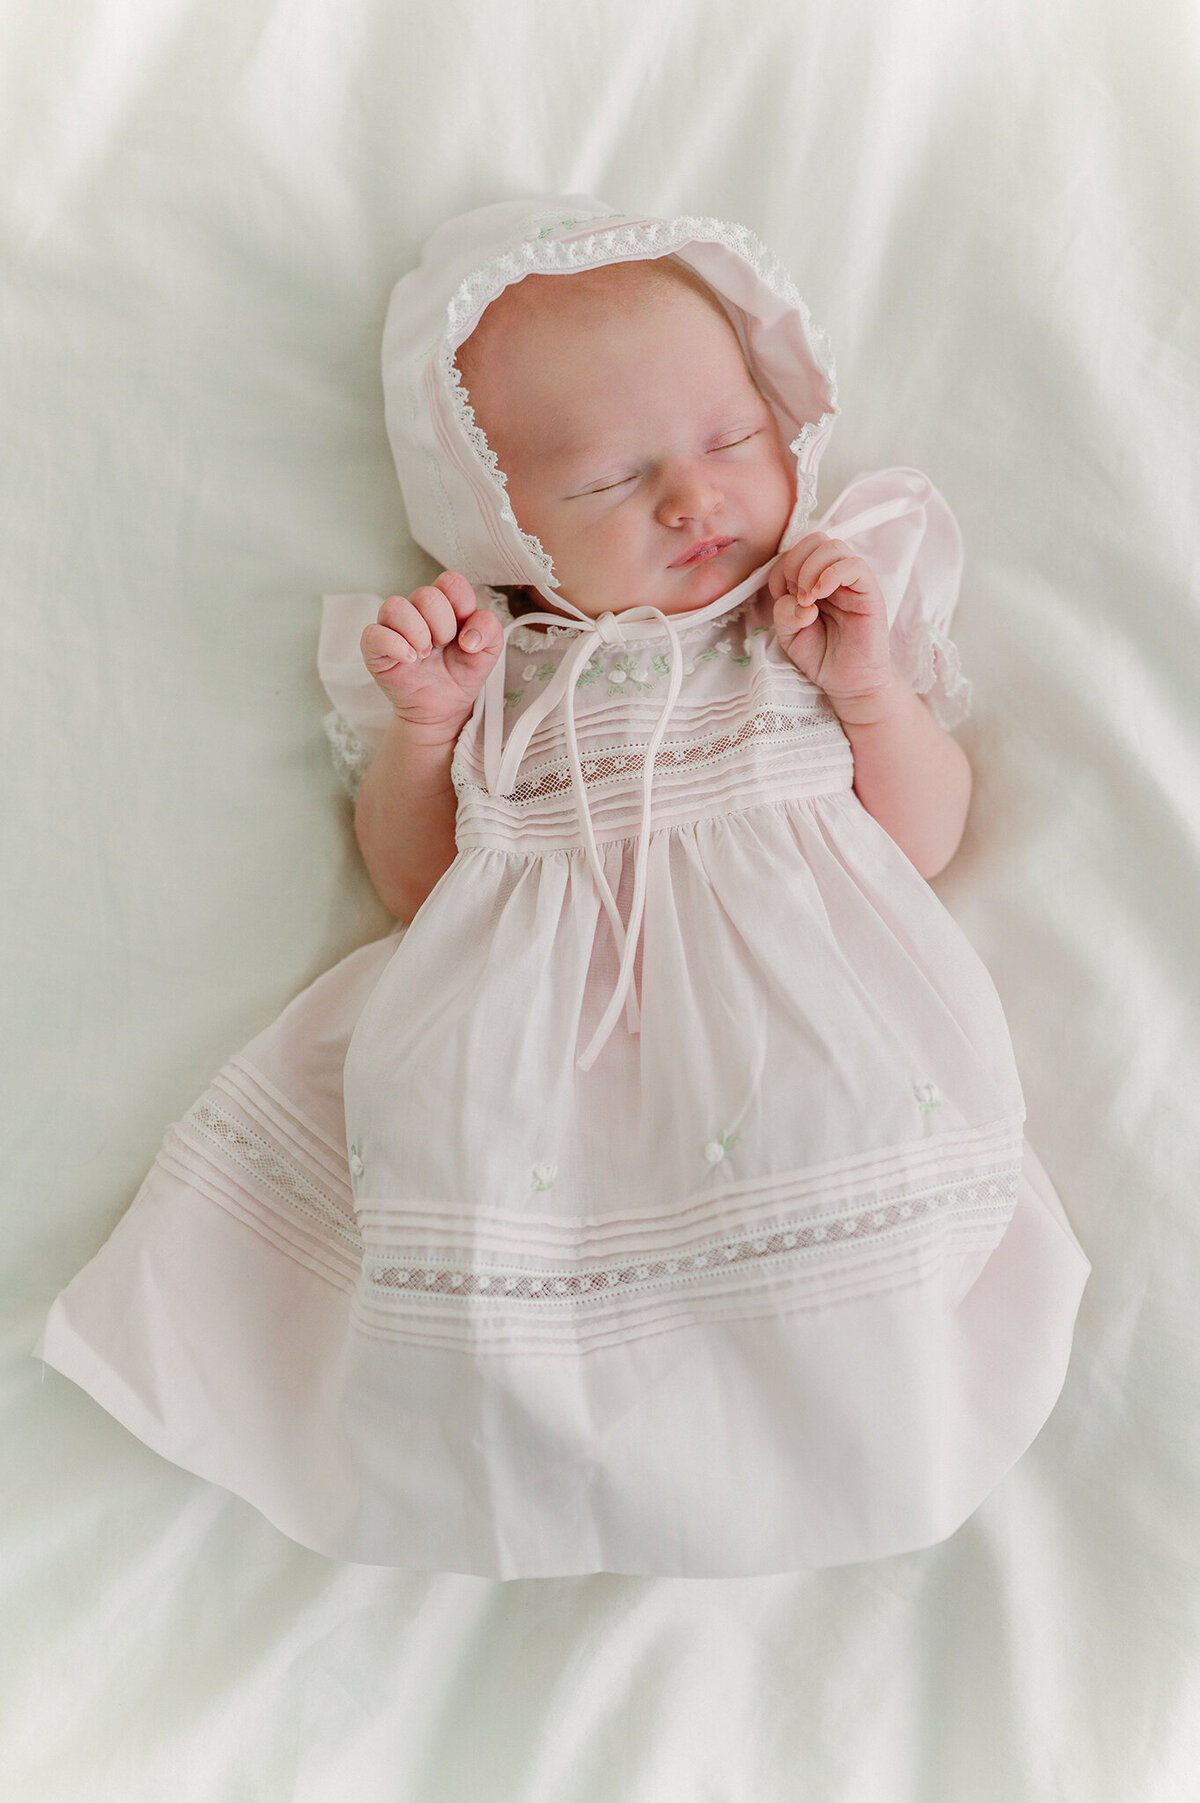 Baby laying on back wearing a heirloom gown and bonnet.